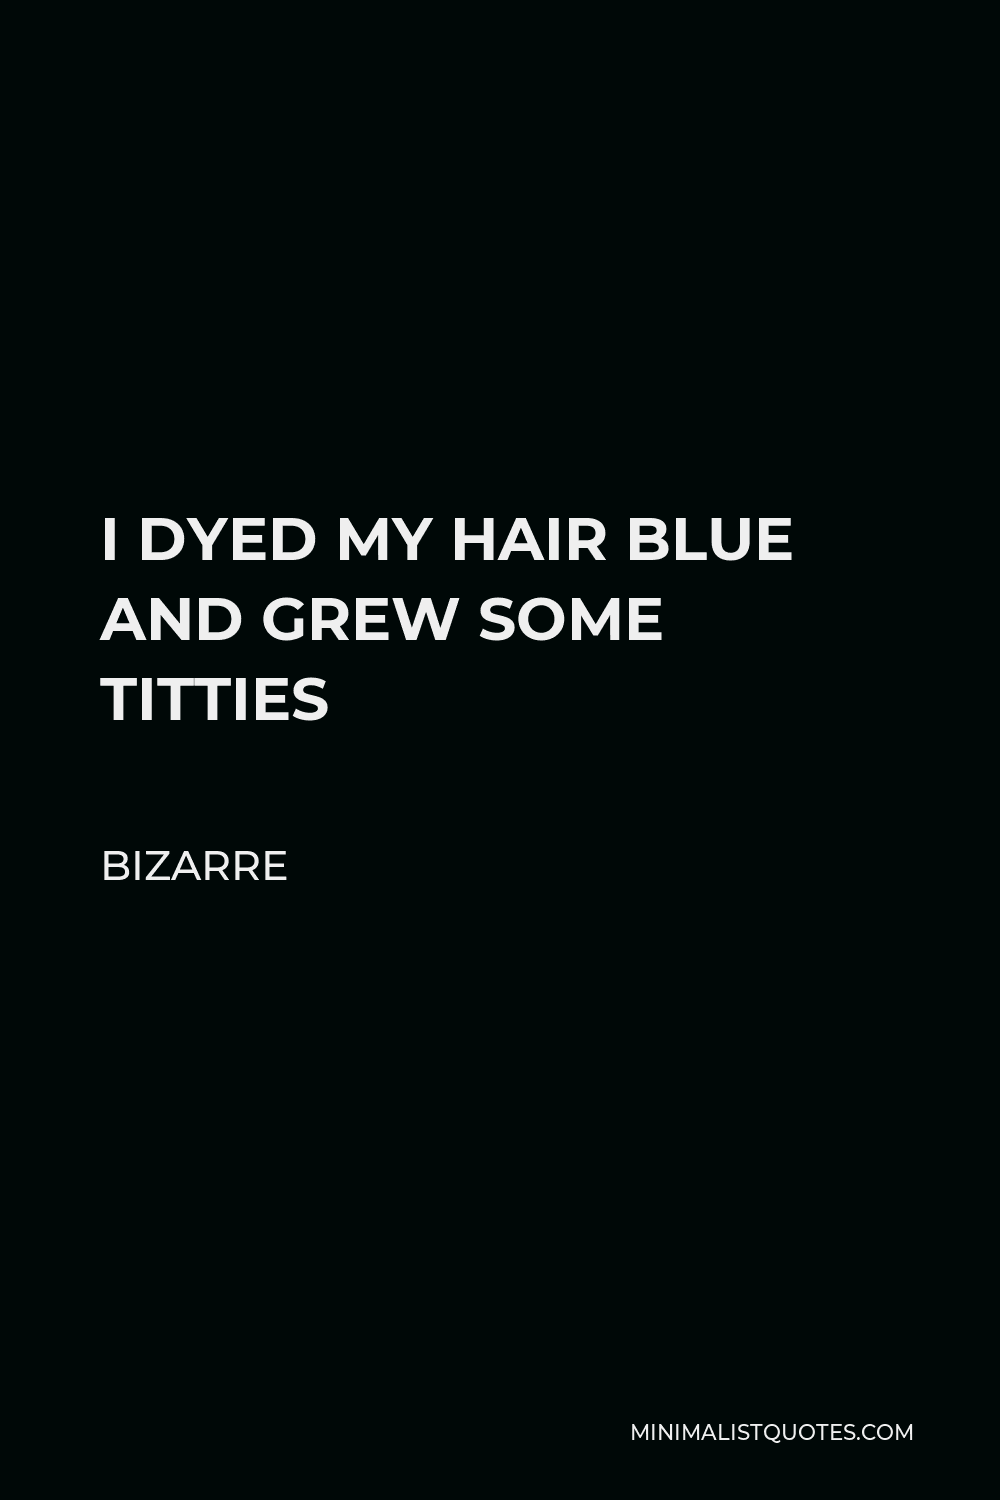 Bizarre Quote - I DYED MY HAIR BLUE AND GREW SOME TITTIES